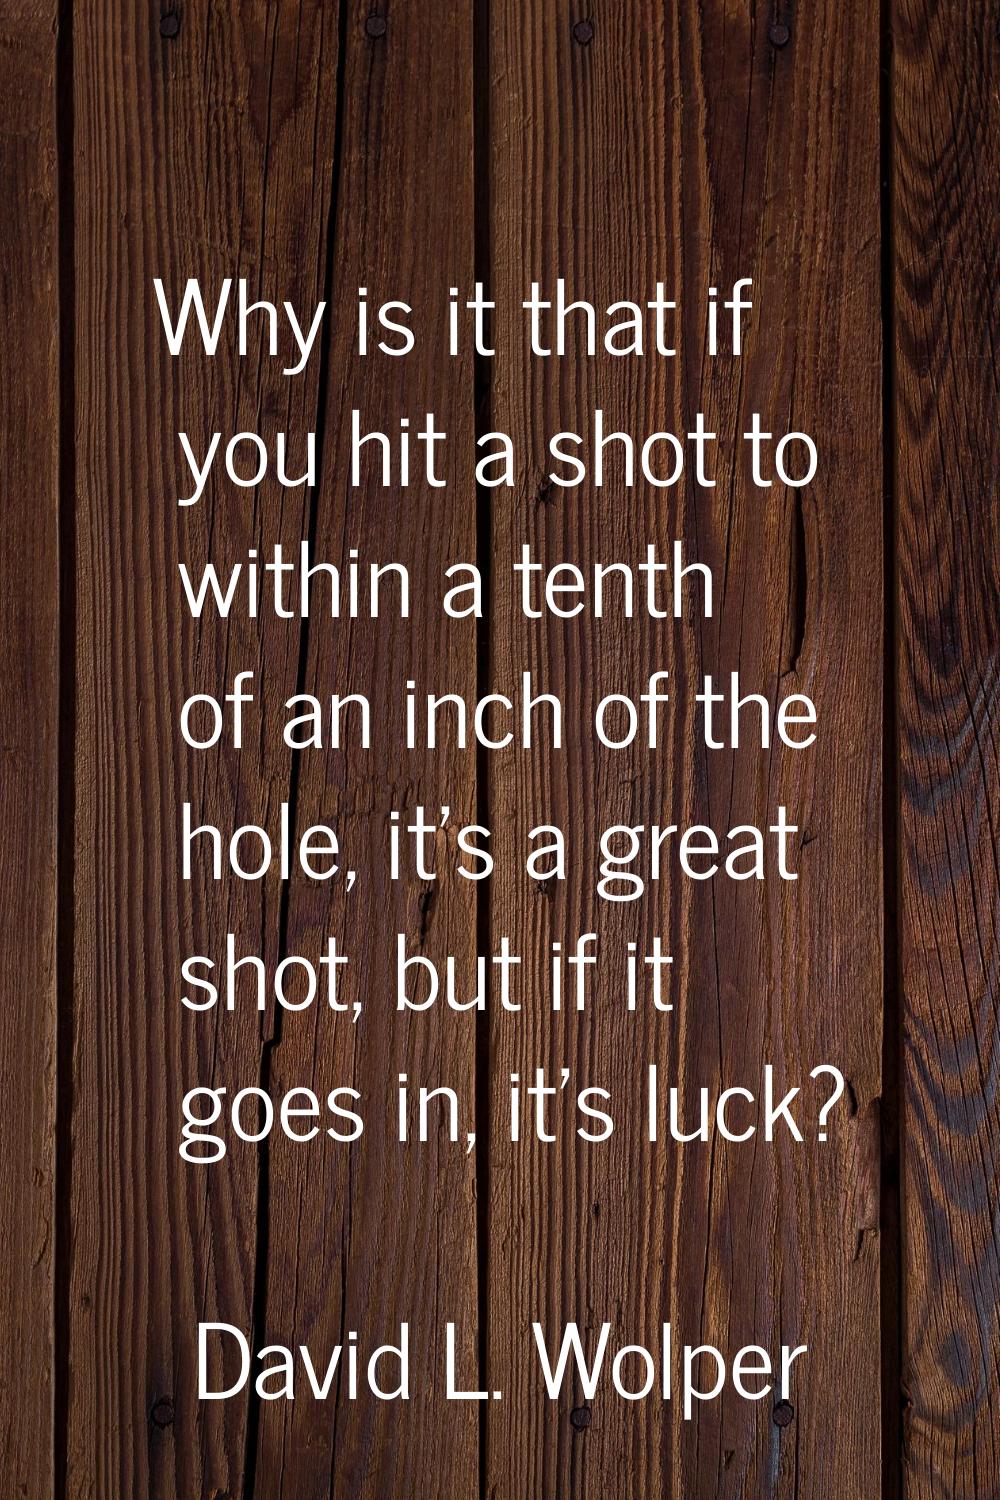 Why is it that if you hit a shot to within a tenth of an inch of the hole, it's a great shot, but i